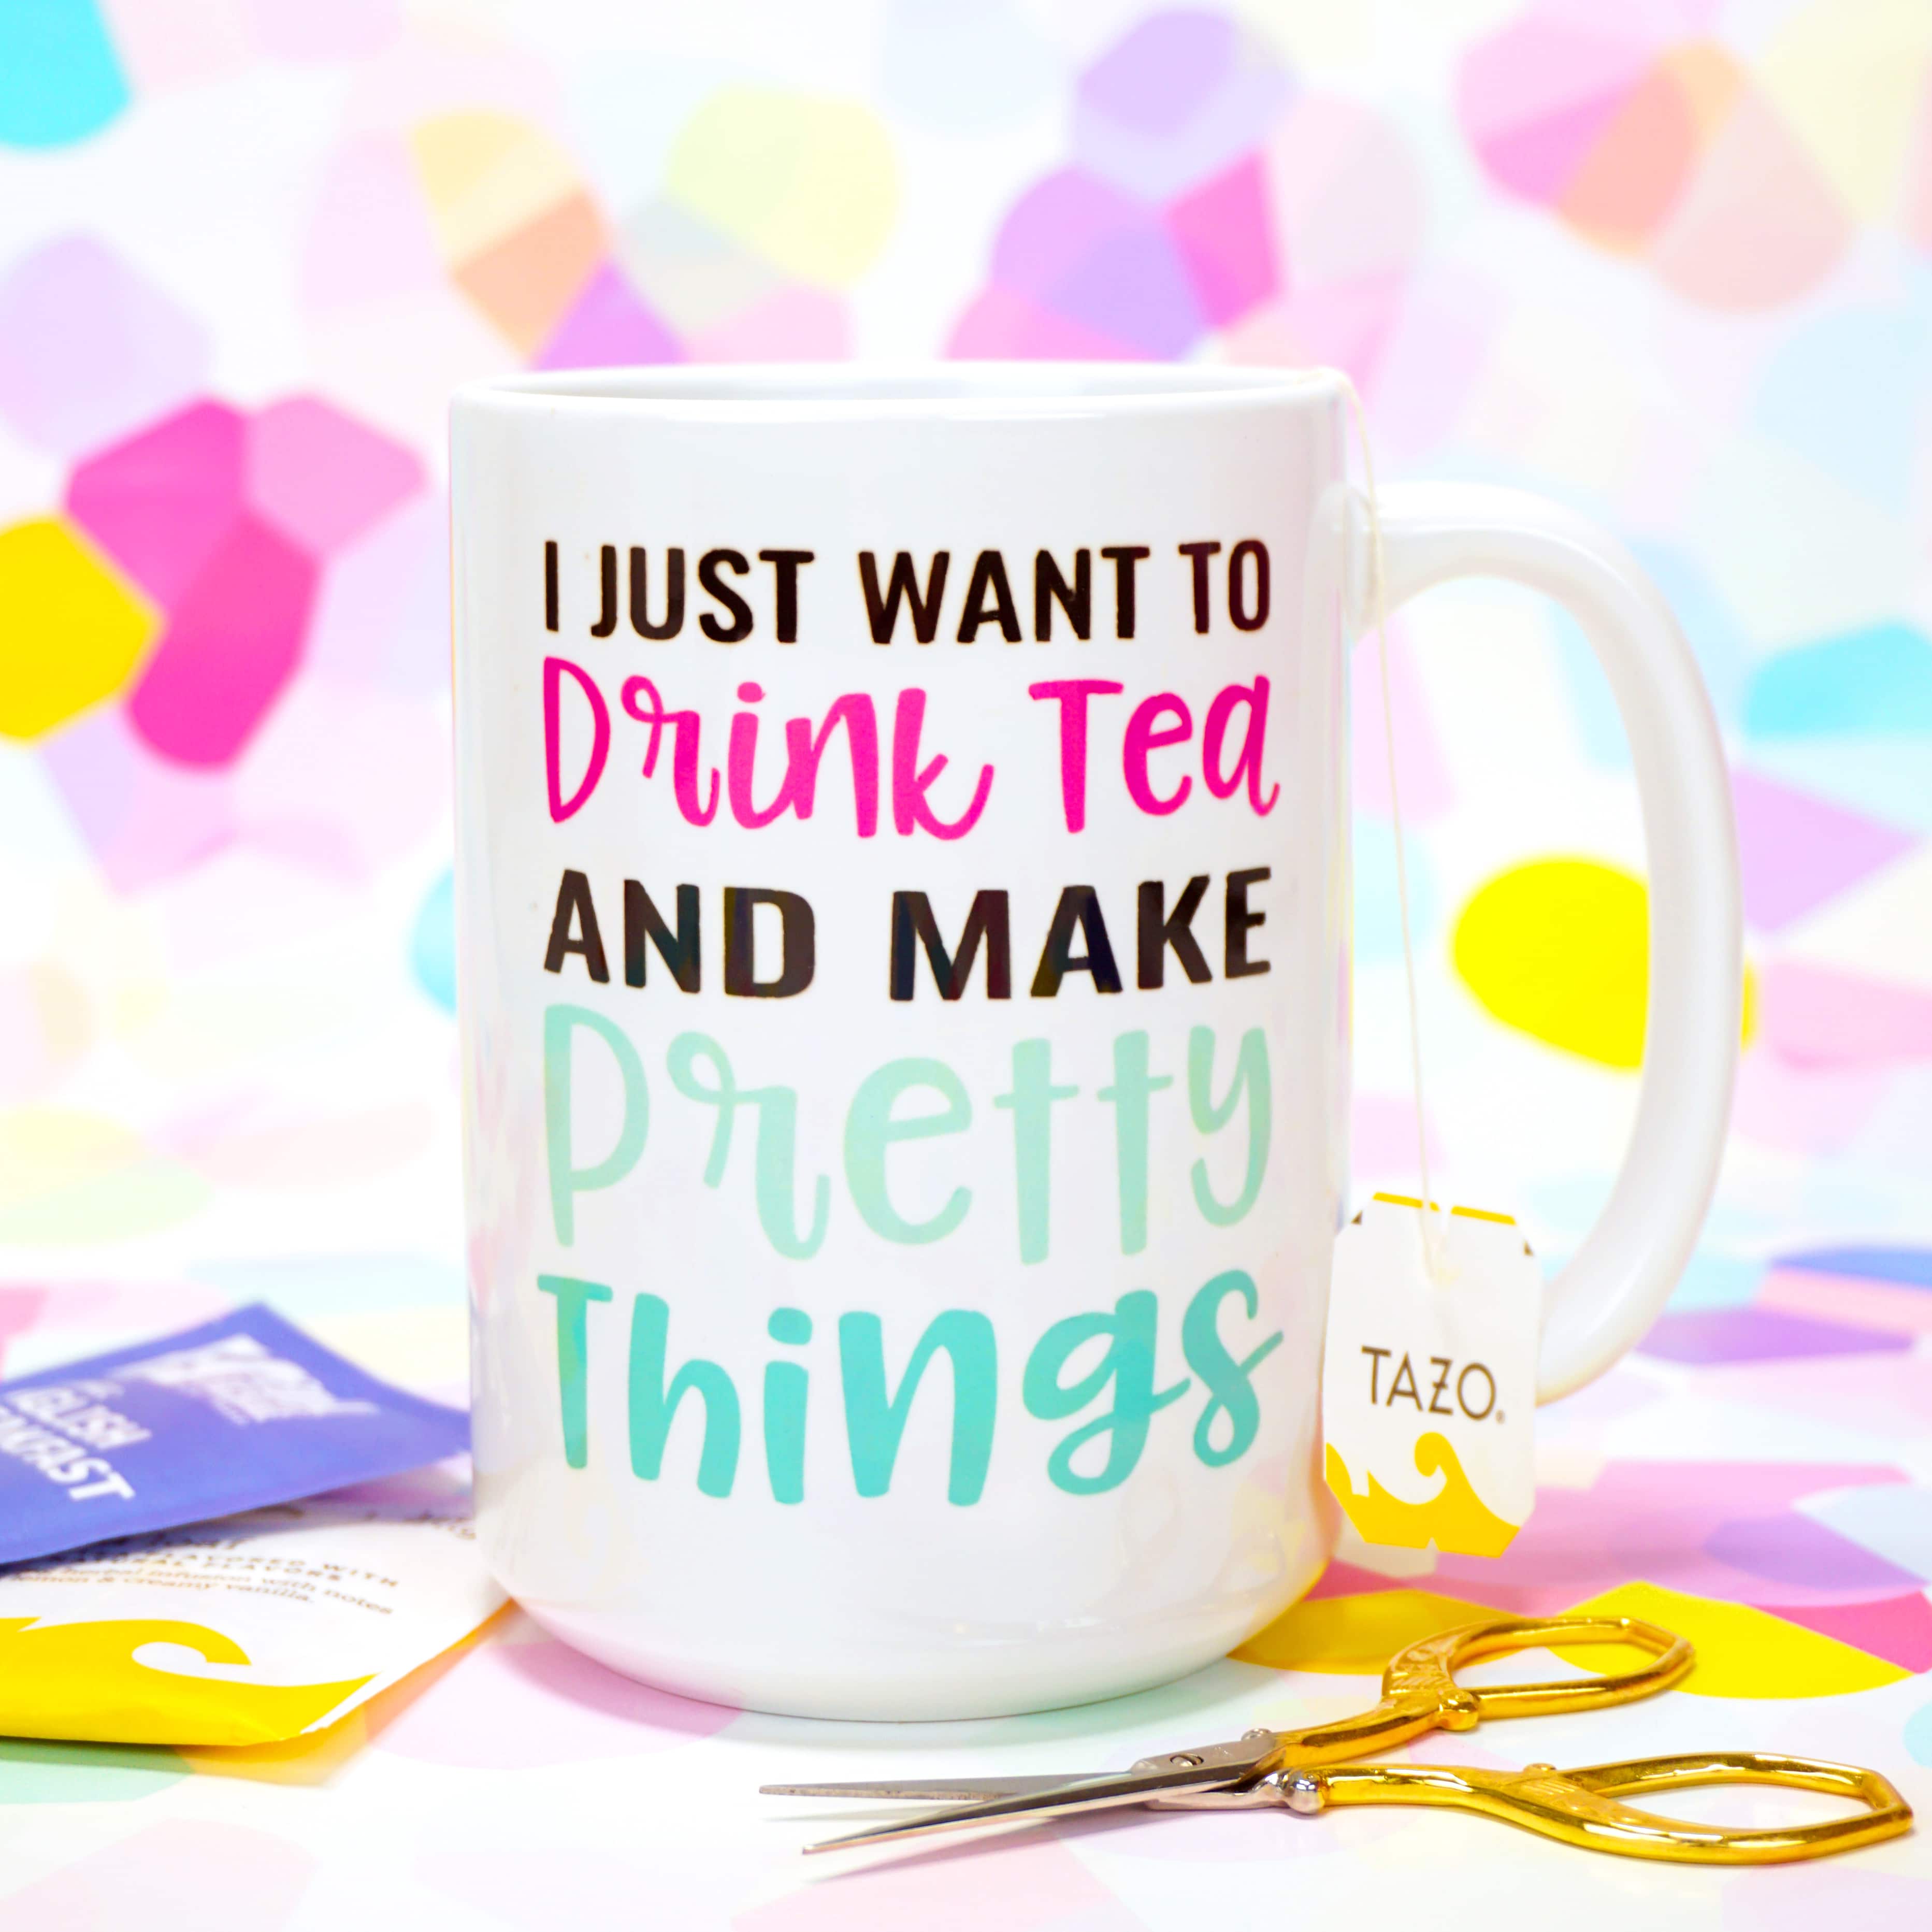 "I Just Want to Drink Tea and Make Pretty Things" mug made with Cricut Infusible Ink on colorful background